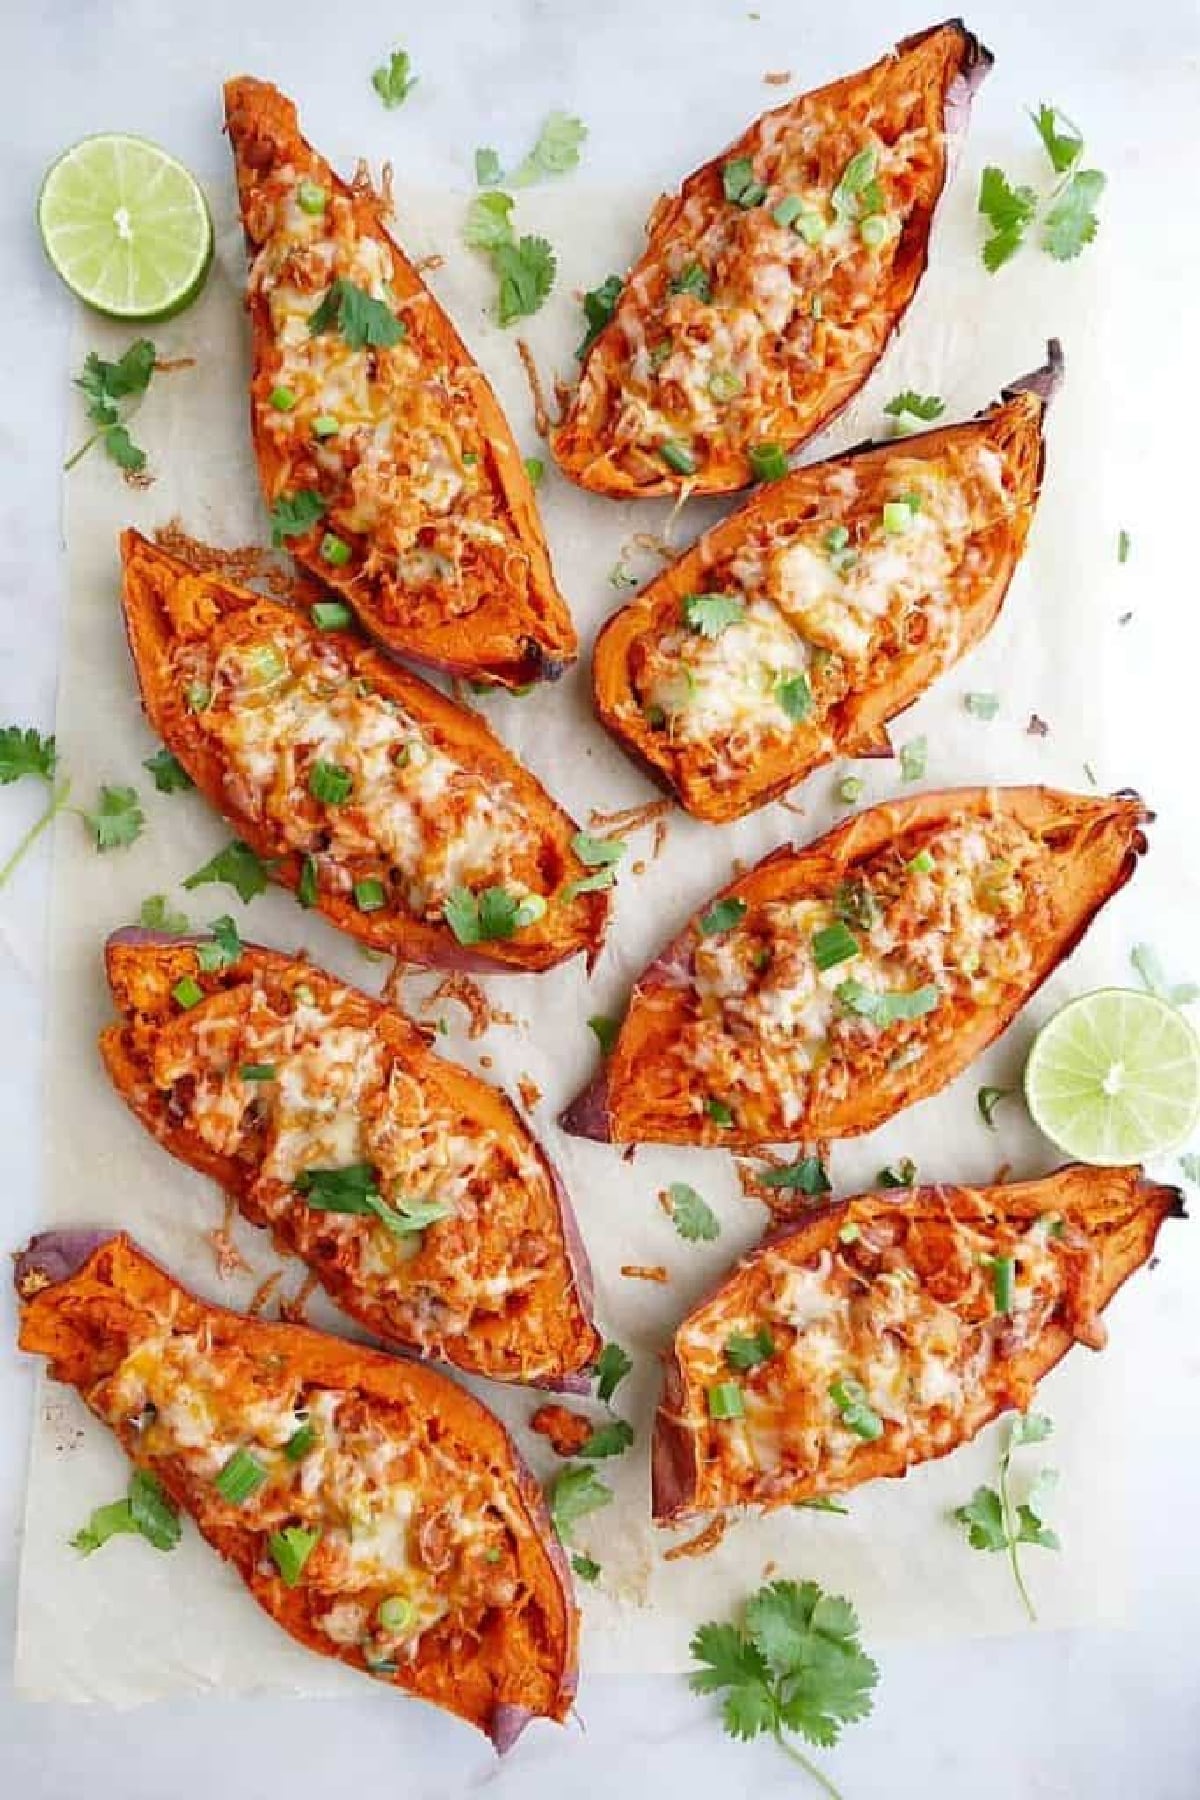 Healthy sweet potato skins with BBQ beans on a white table with with limes slices and cilantro.